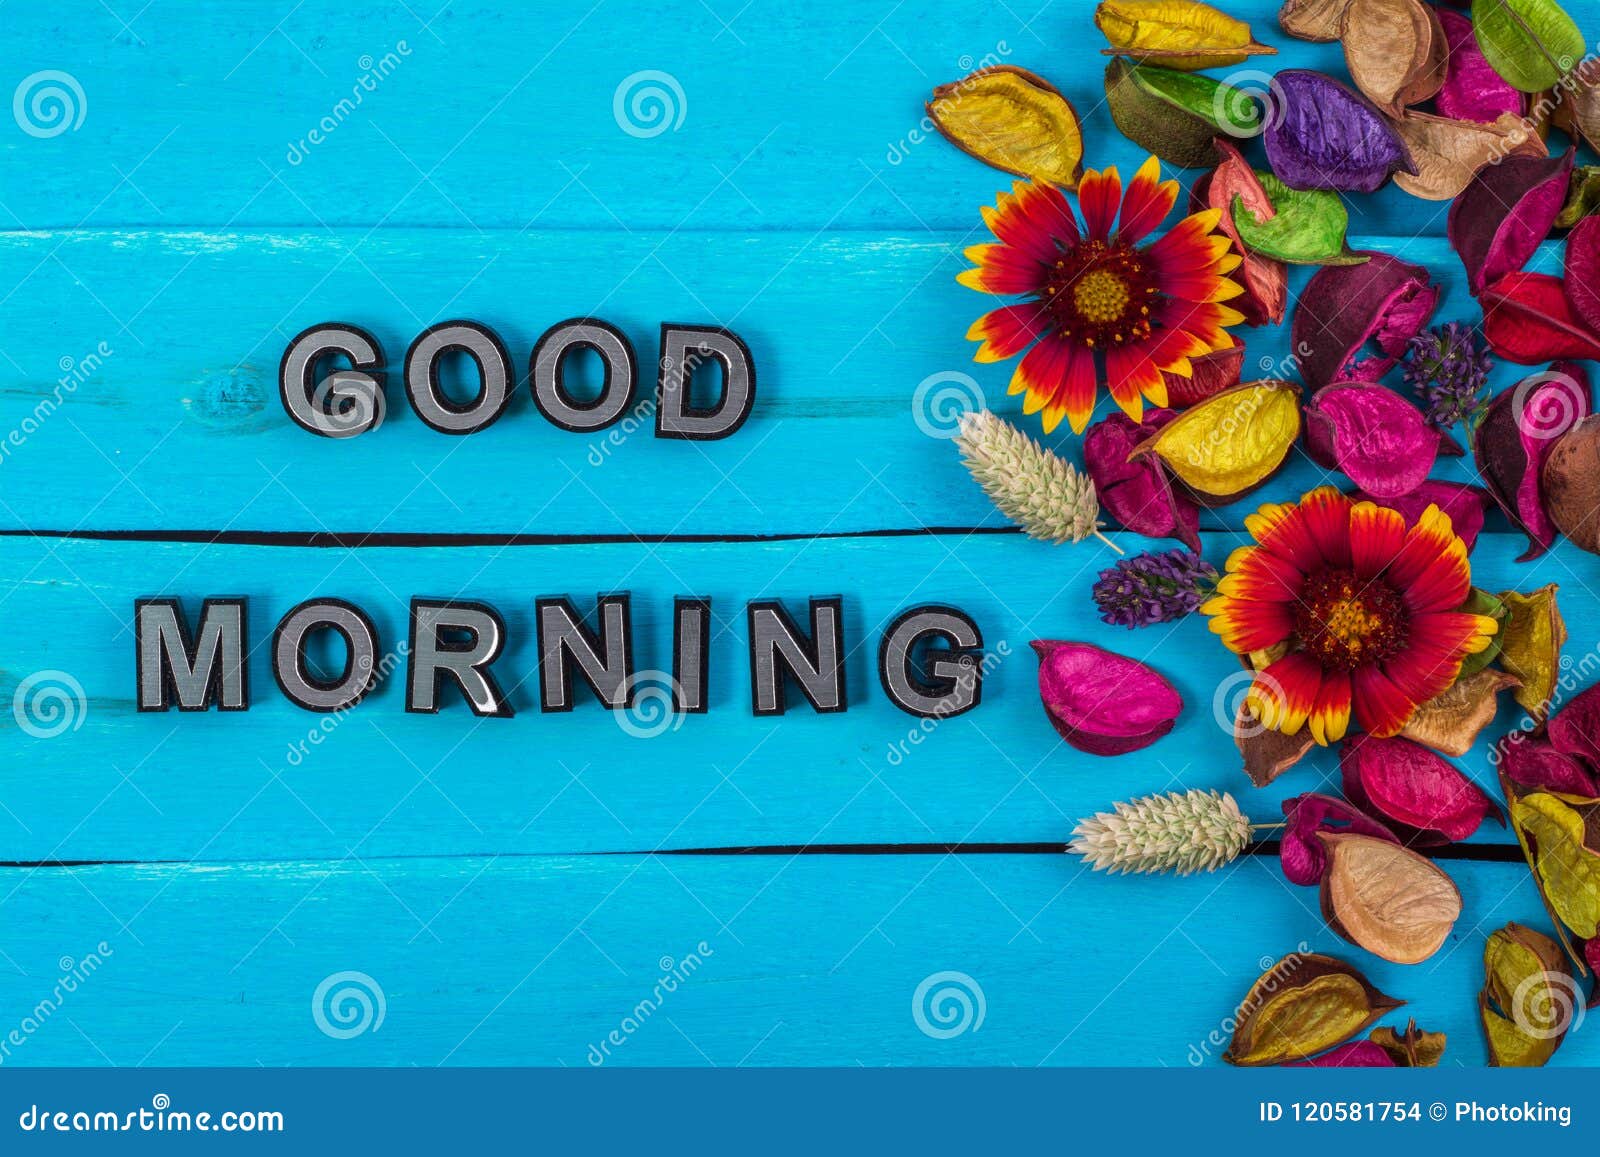 Good Morning Word on Blue Wood with Flower Stock Photo - Image of ...